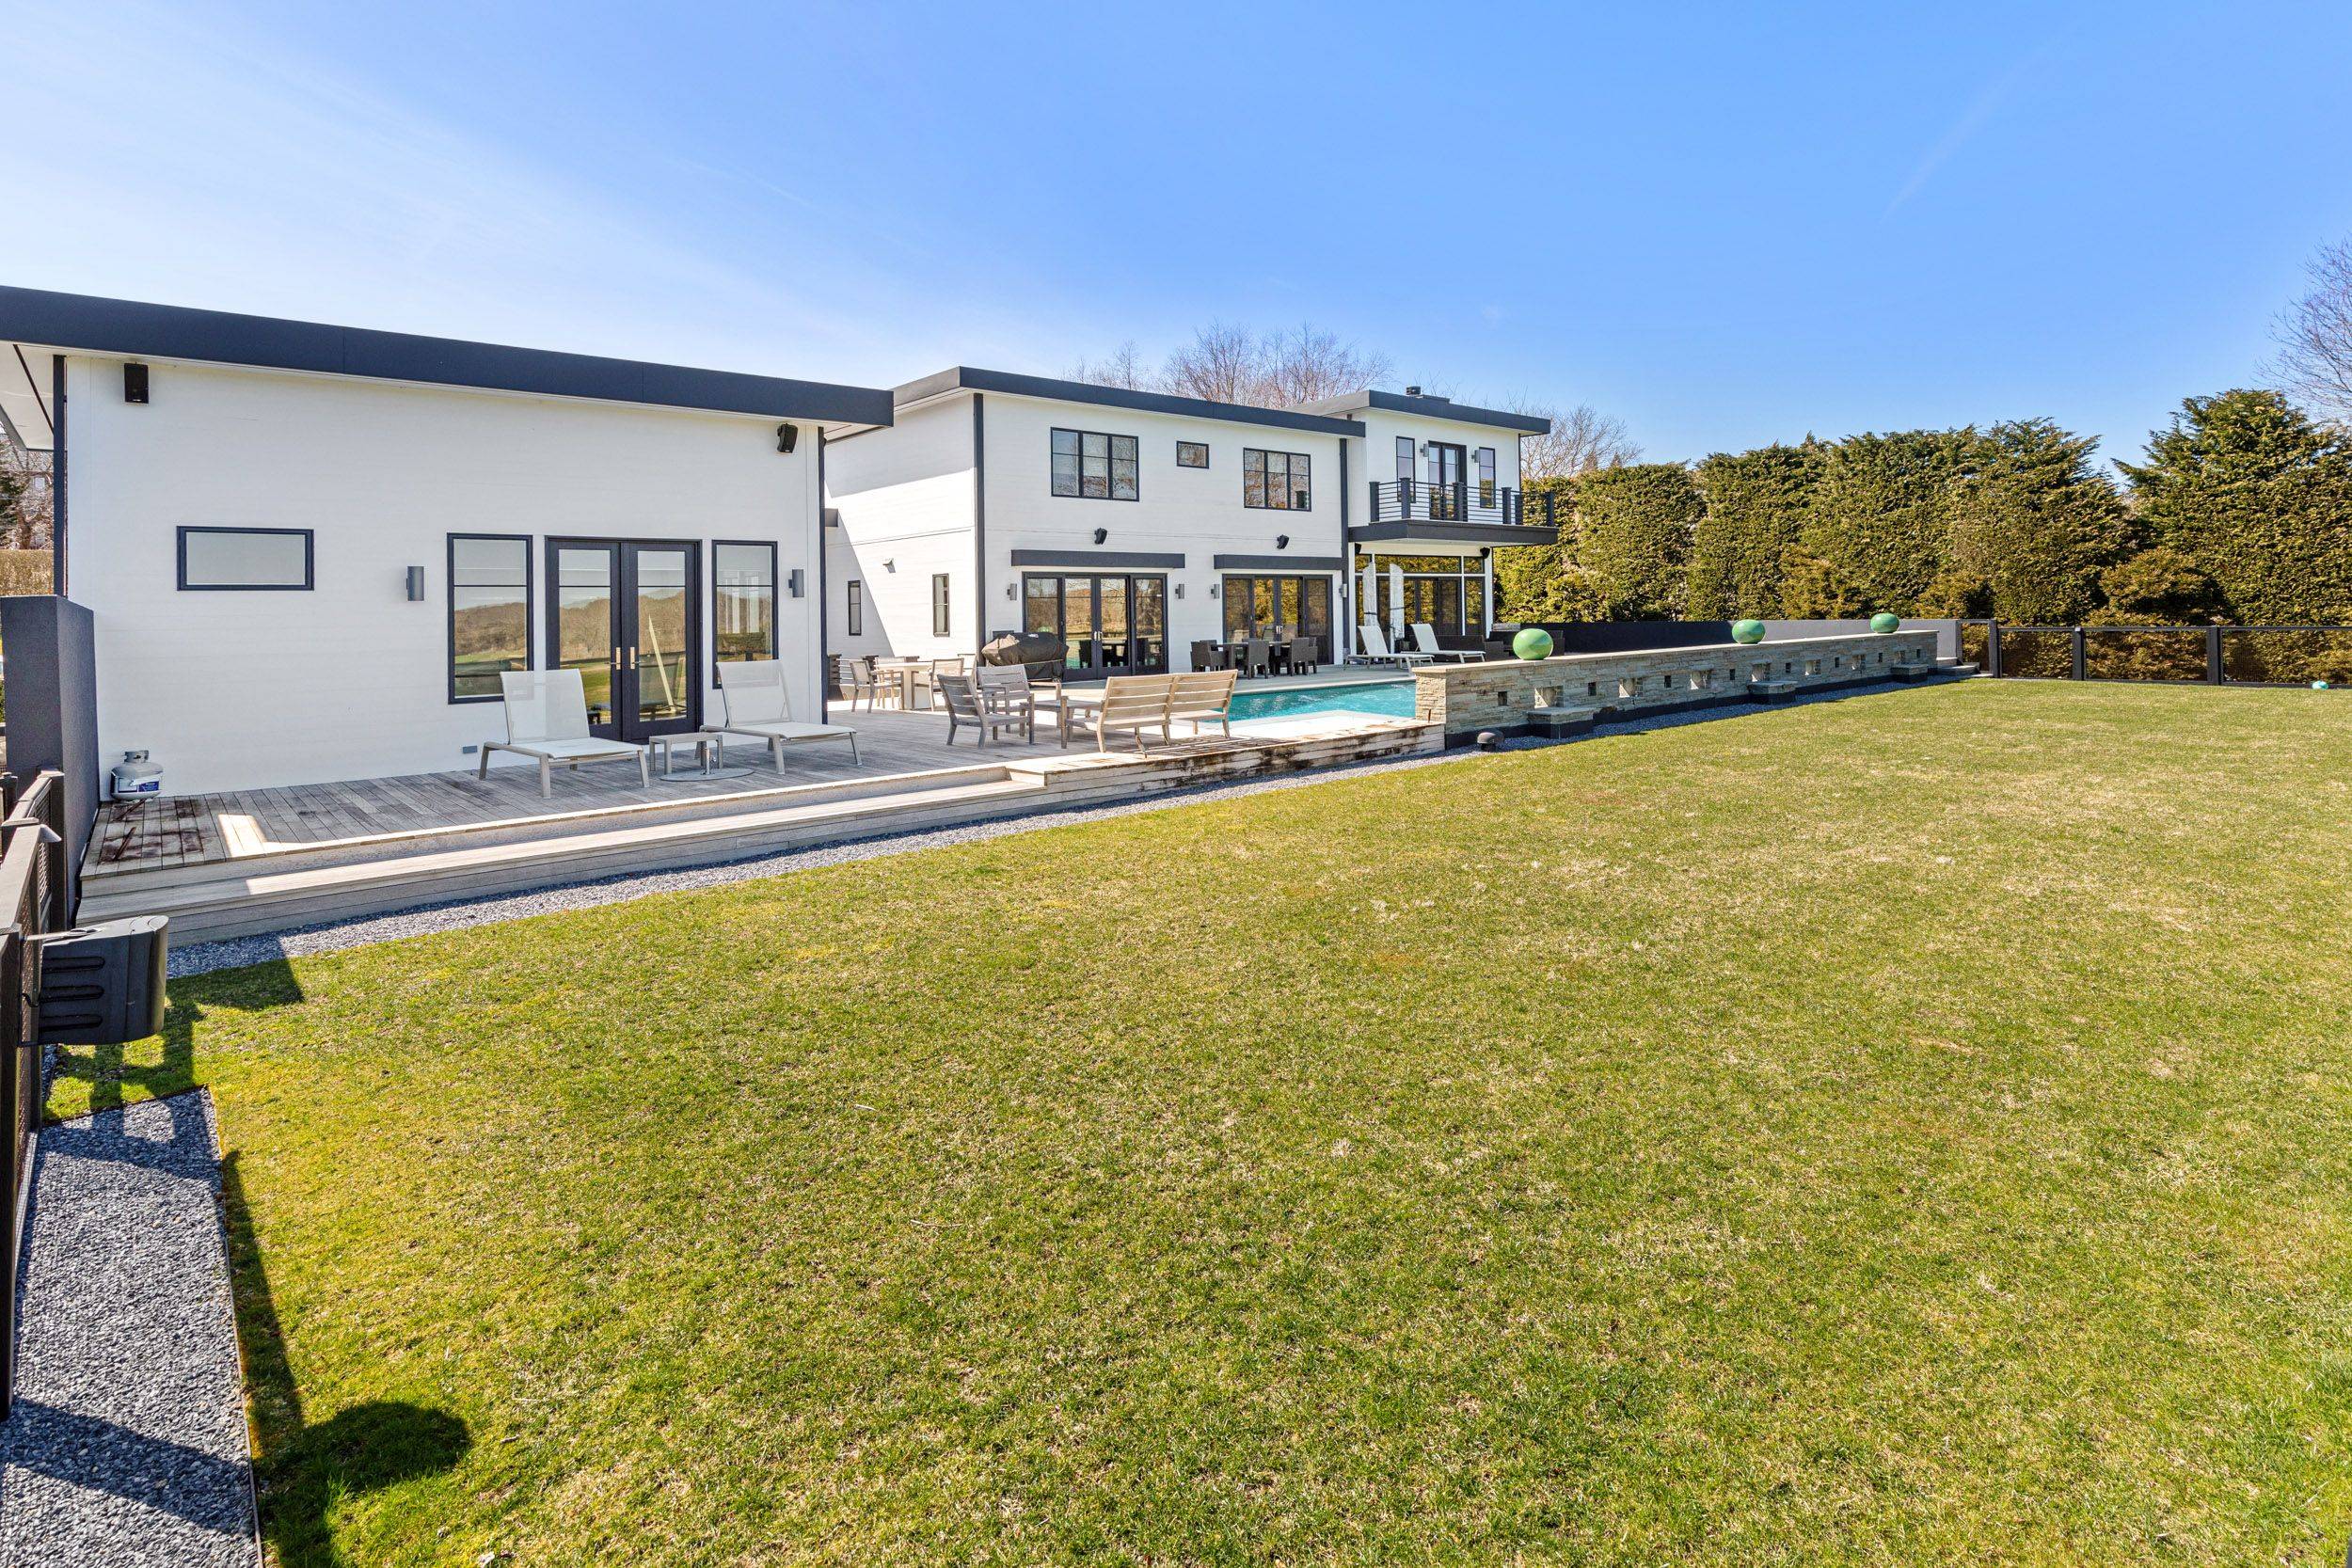 Southampton Modern Stunner - 5 Bed and Poolhouse!